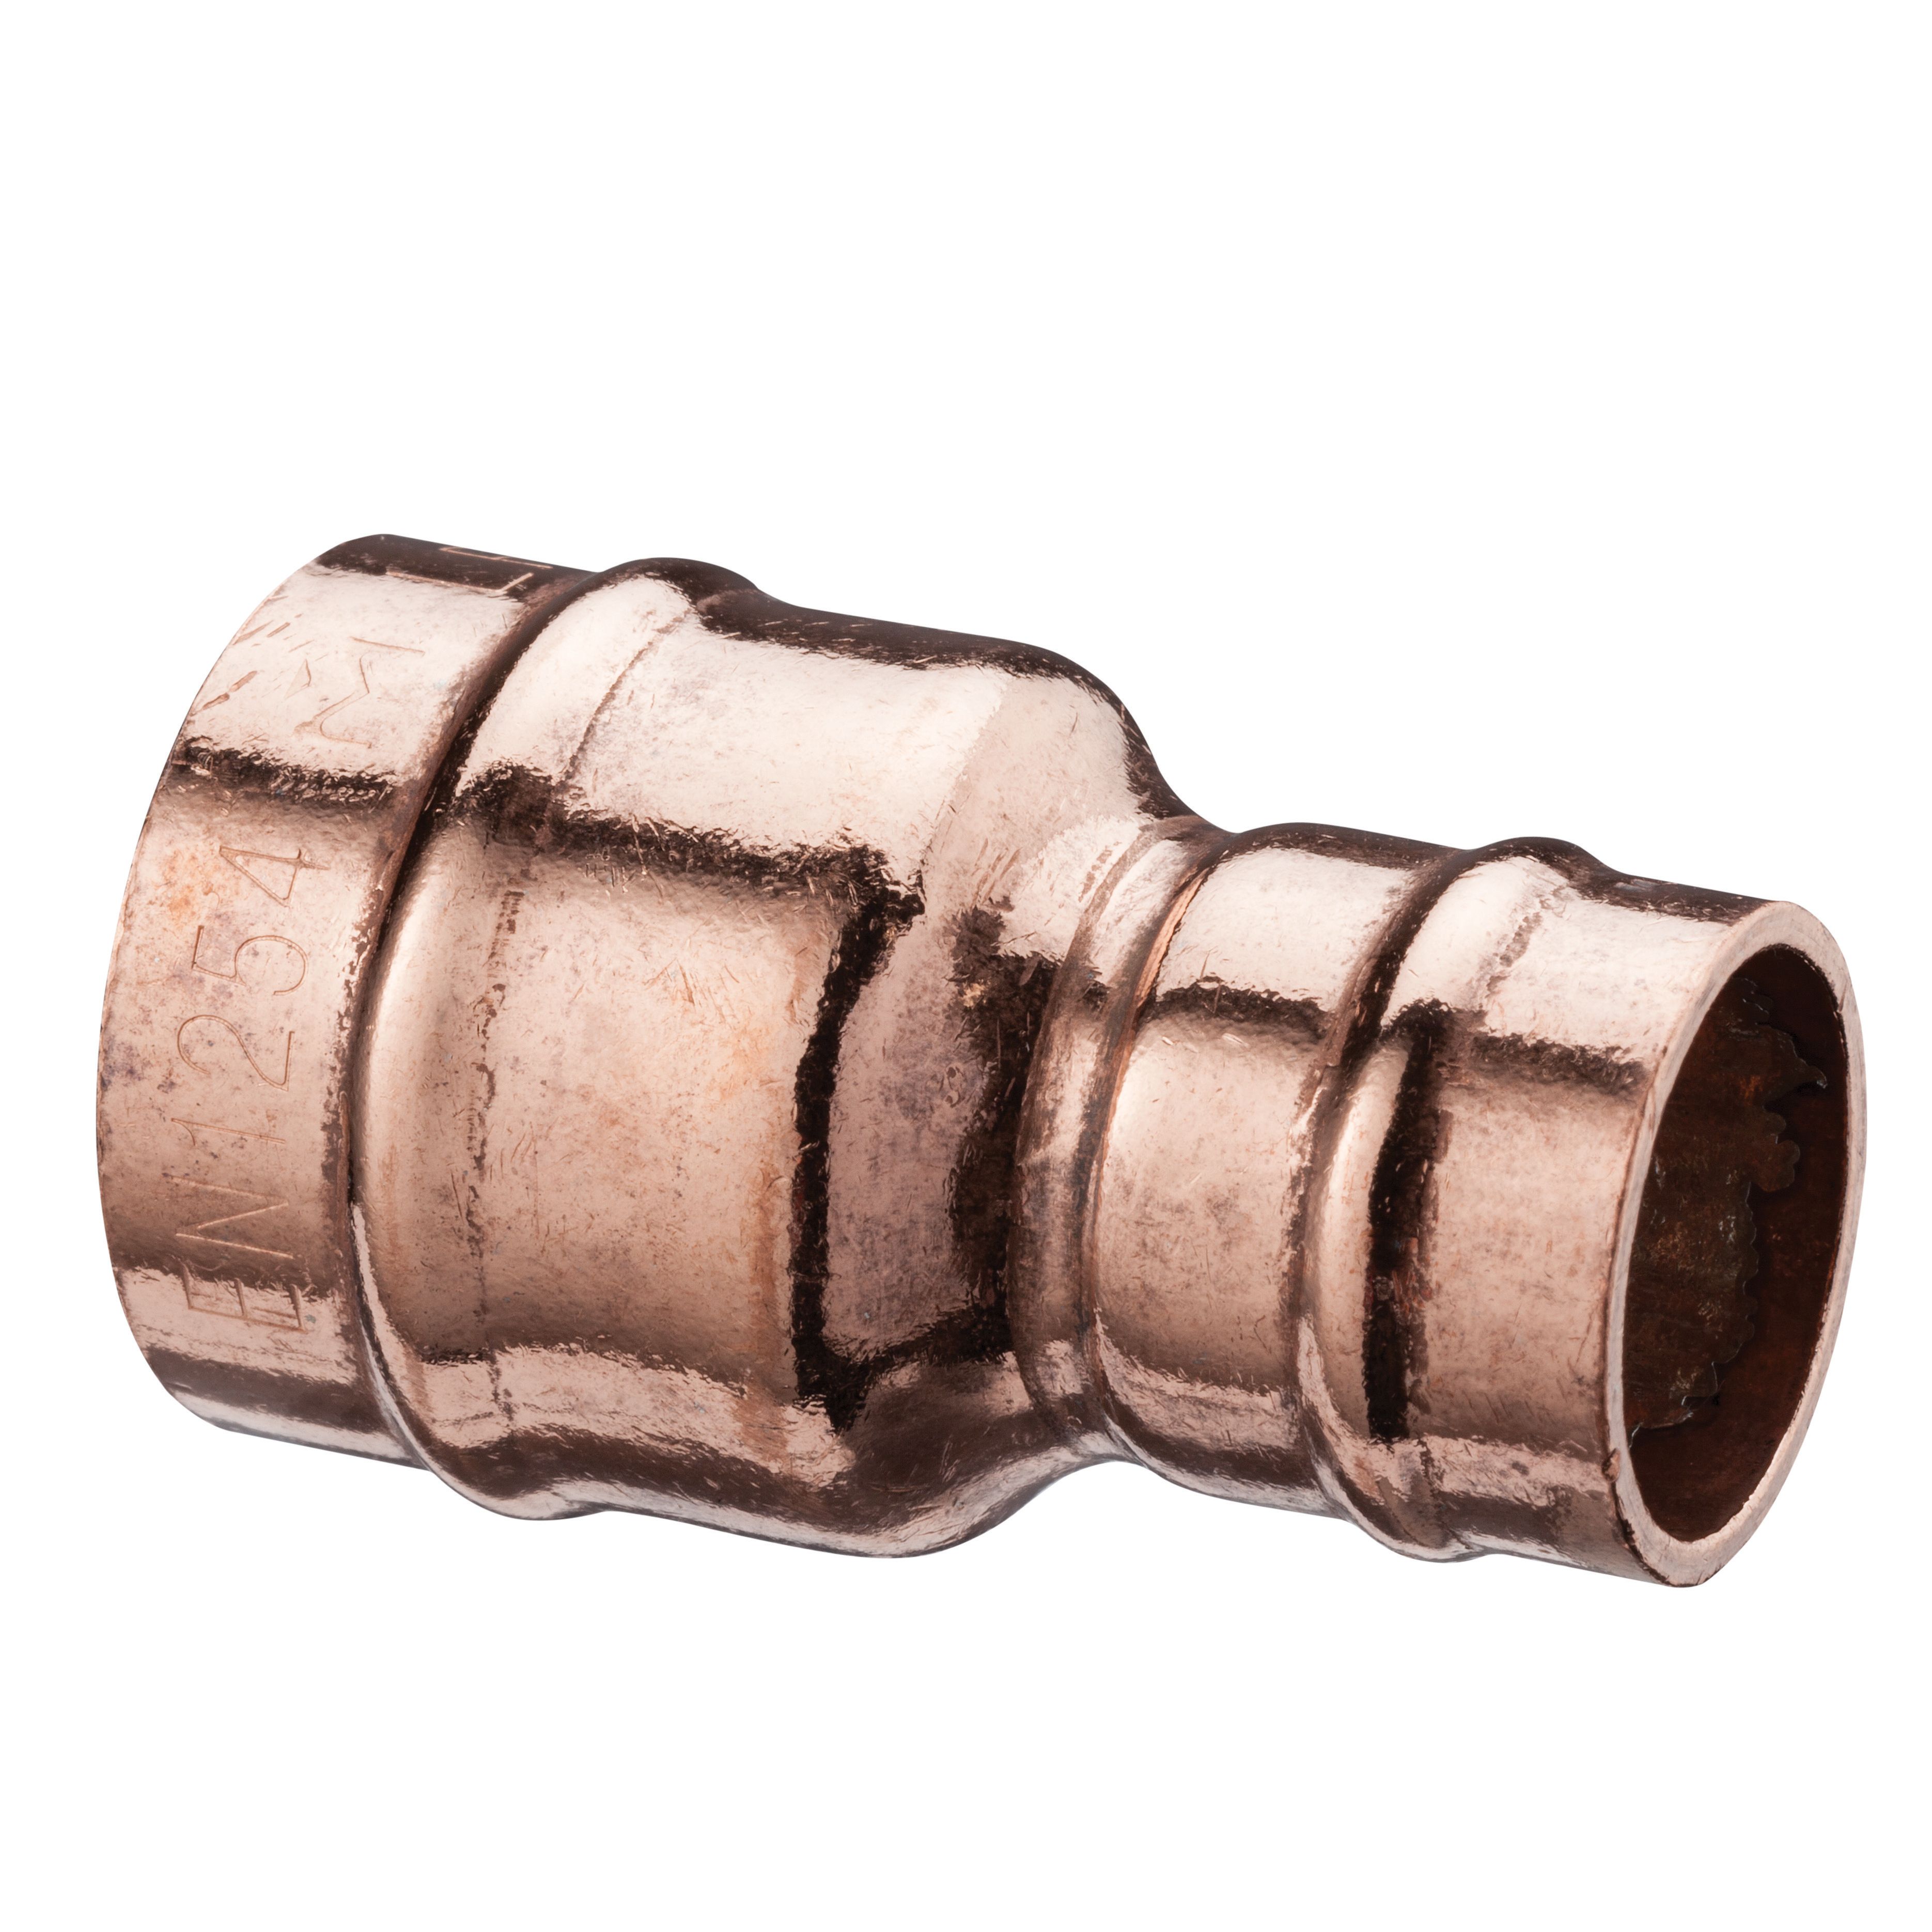 Image of Primaflow Copper Solder Ring Reduced Coupling - 10 X 15mm